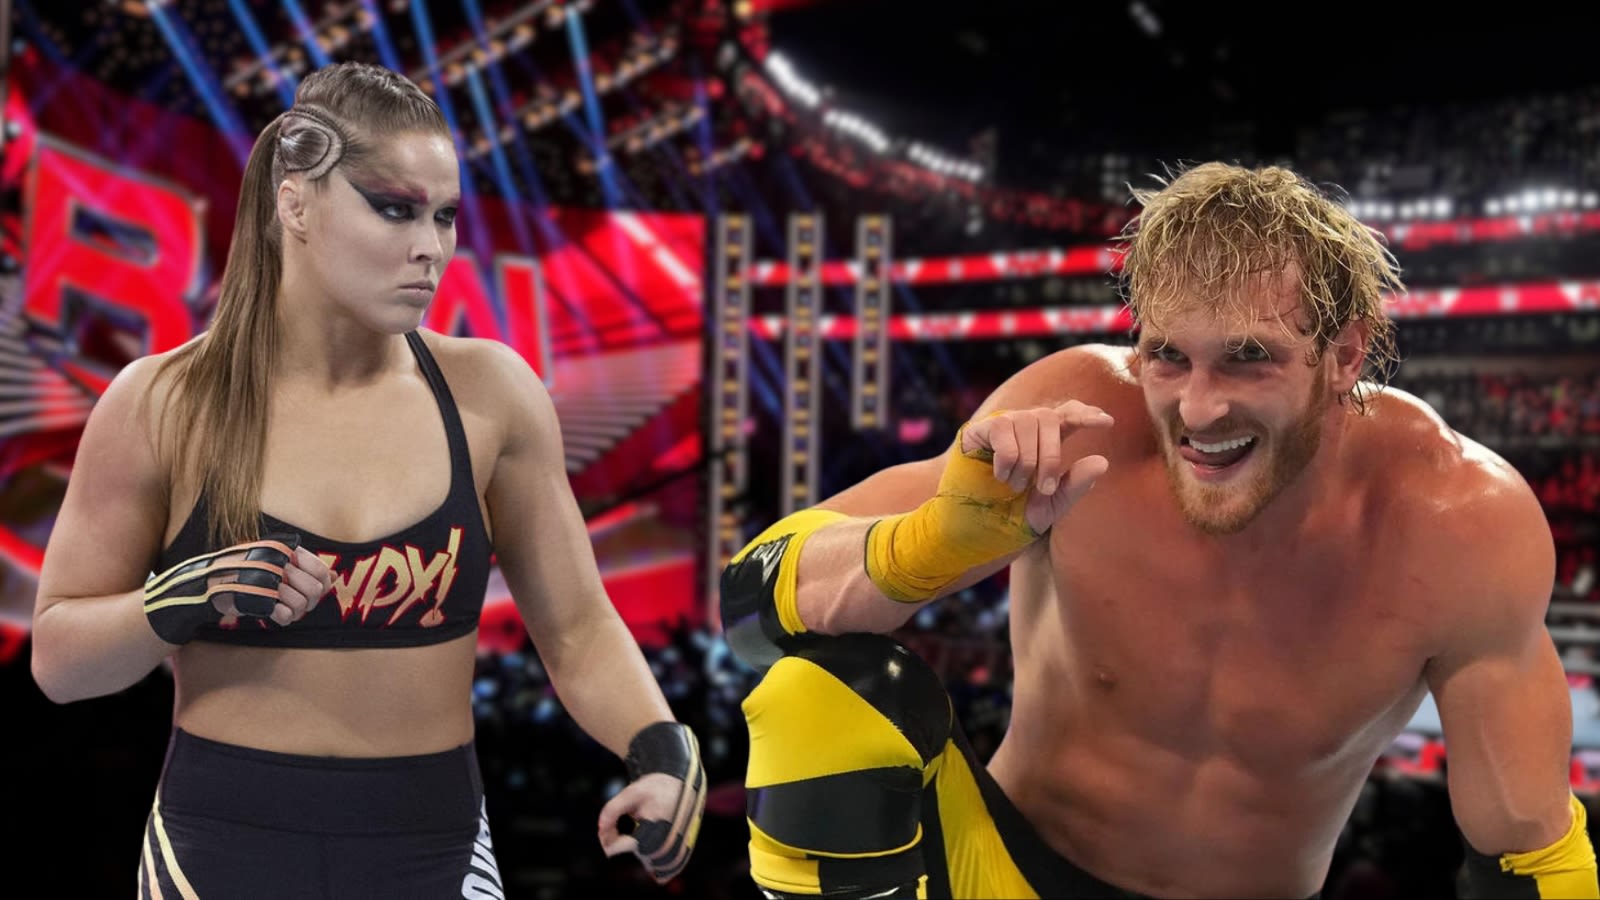 Logan Paul says he’s ‘proven his value’ to the WWE following Ronda Rousey’s criticism - Dexerto